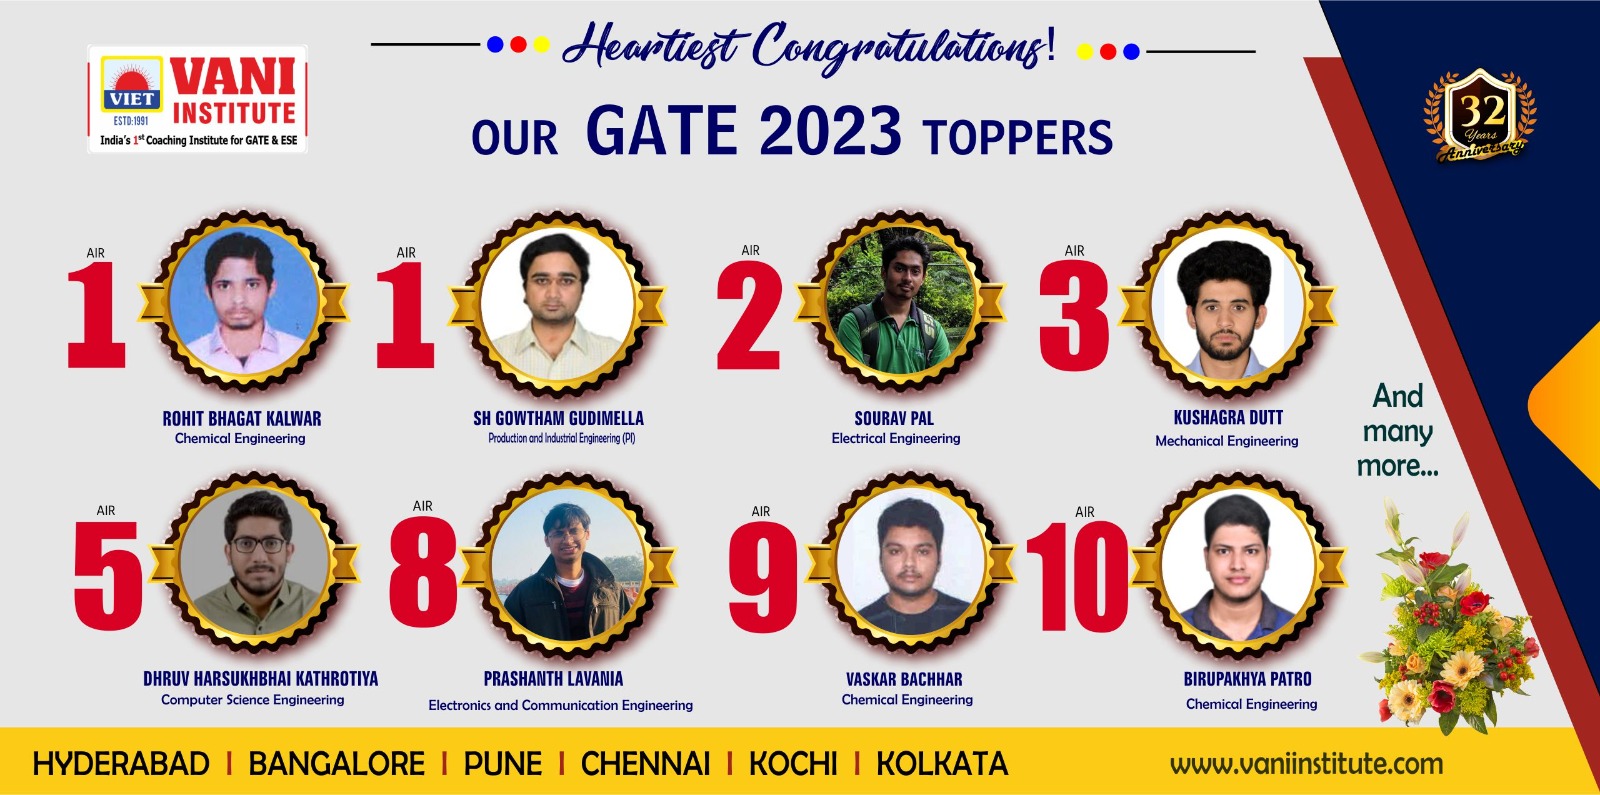 VANI STUDENTS ARE TOP IN GATE 2023 RESULTS...